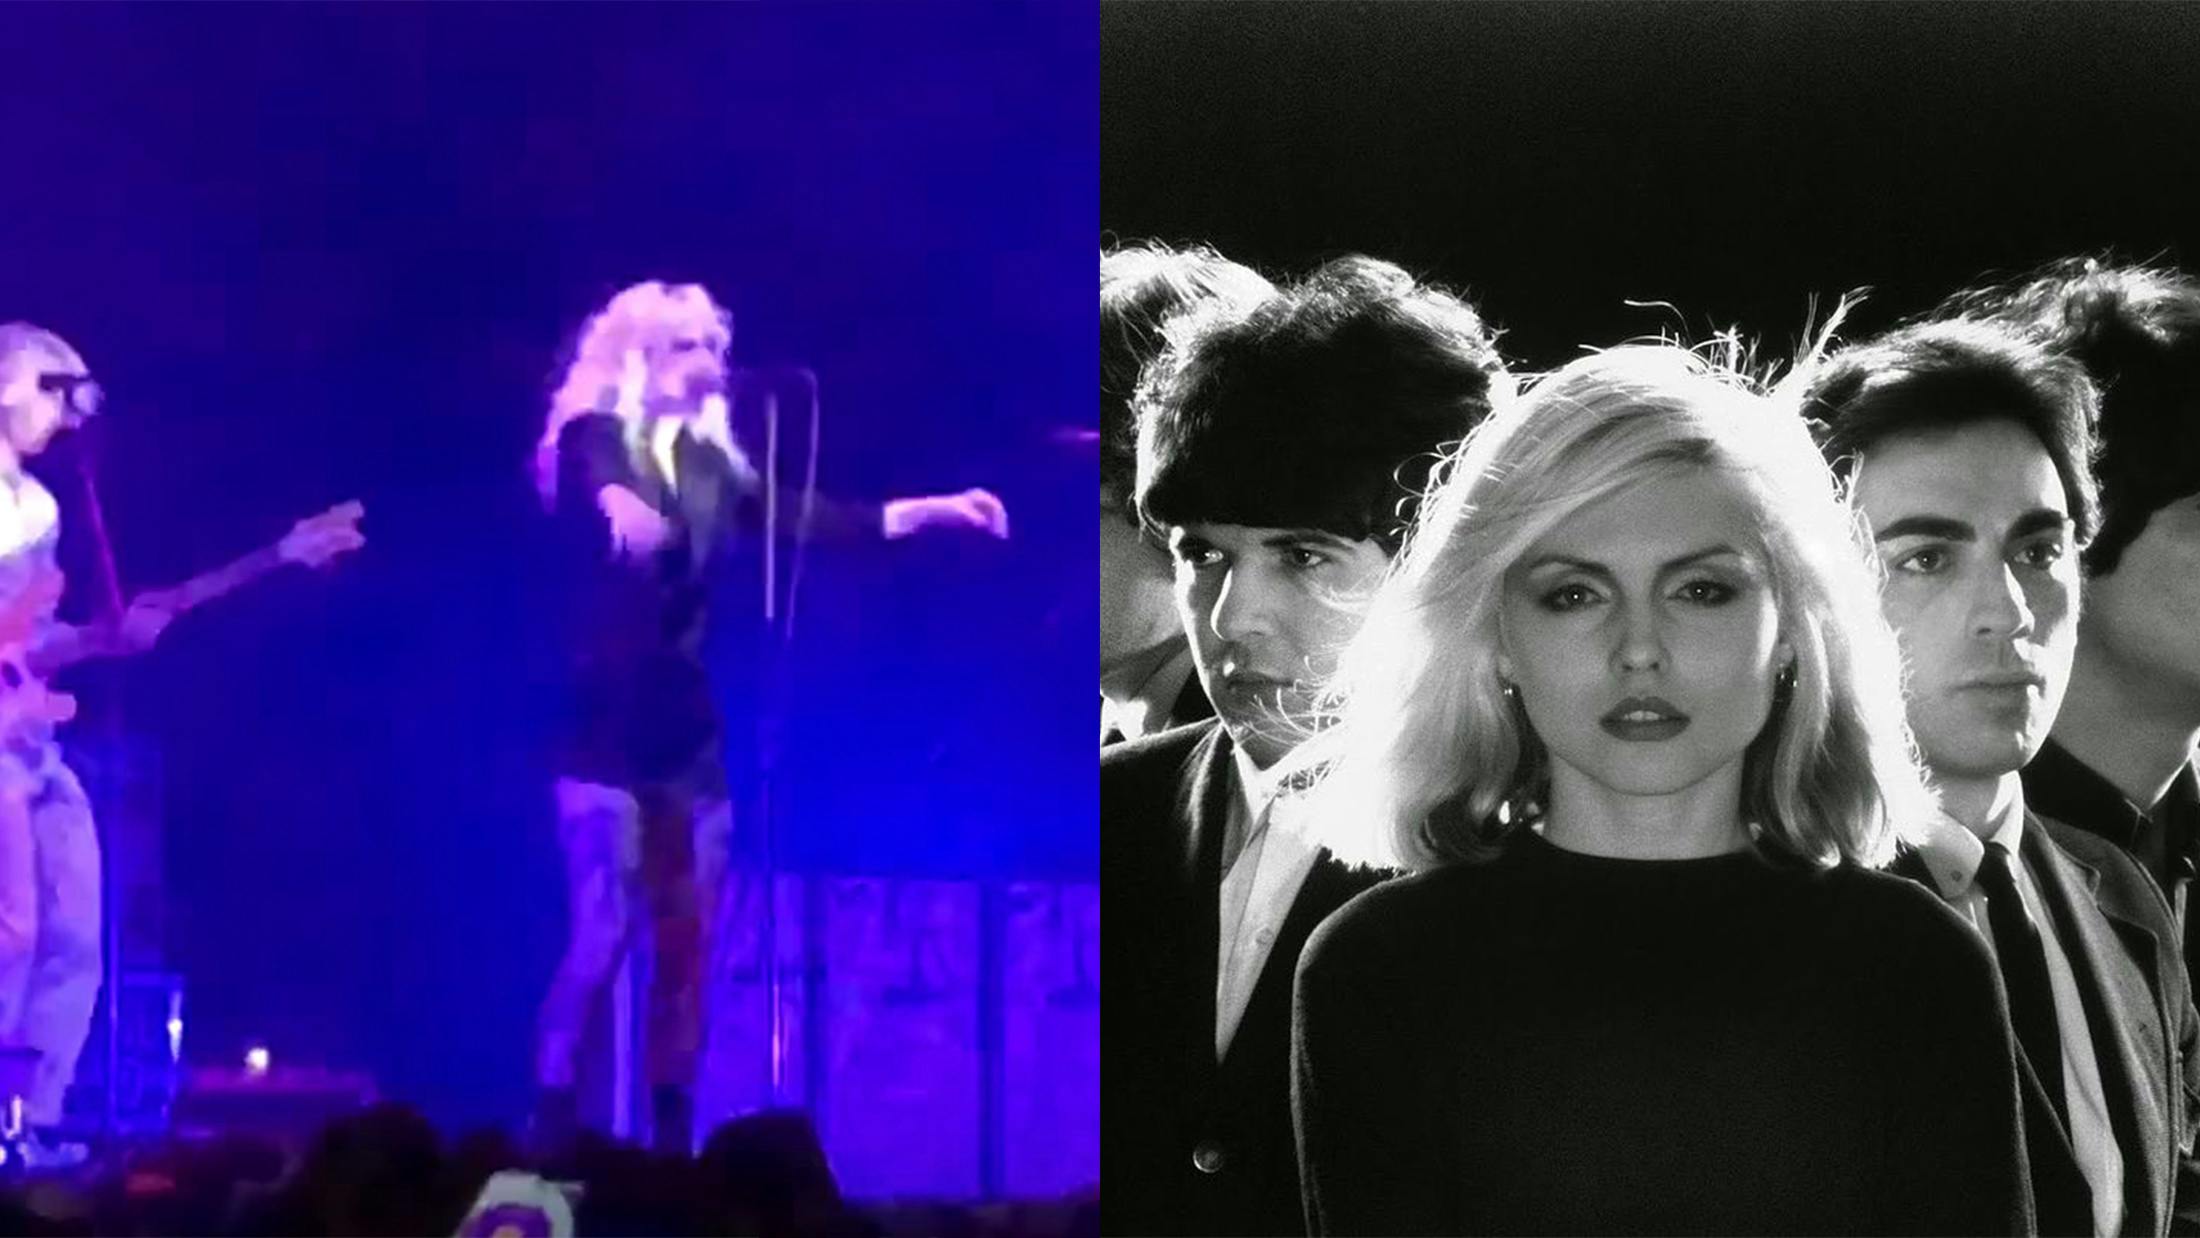 Watch Paramore Mash Up Hard Times With Blondie's Heart Of Glass